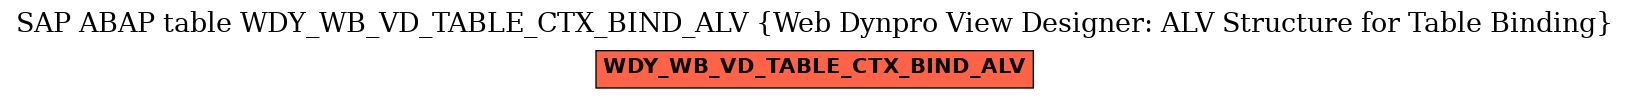 E-R Diagram for table WDY_WB_VD_TABLE_CTX_BIND_ALV (Web Dynpro View Designer: ALV Structure for Table Binding)